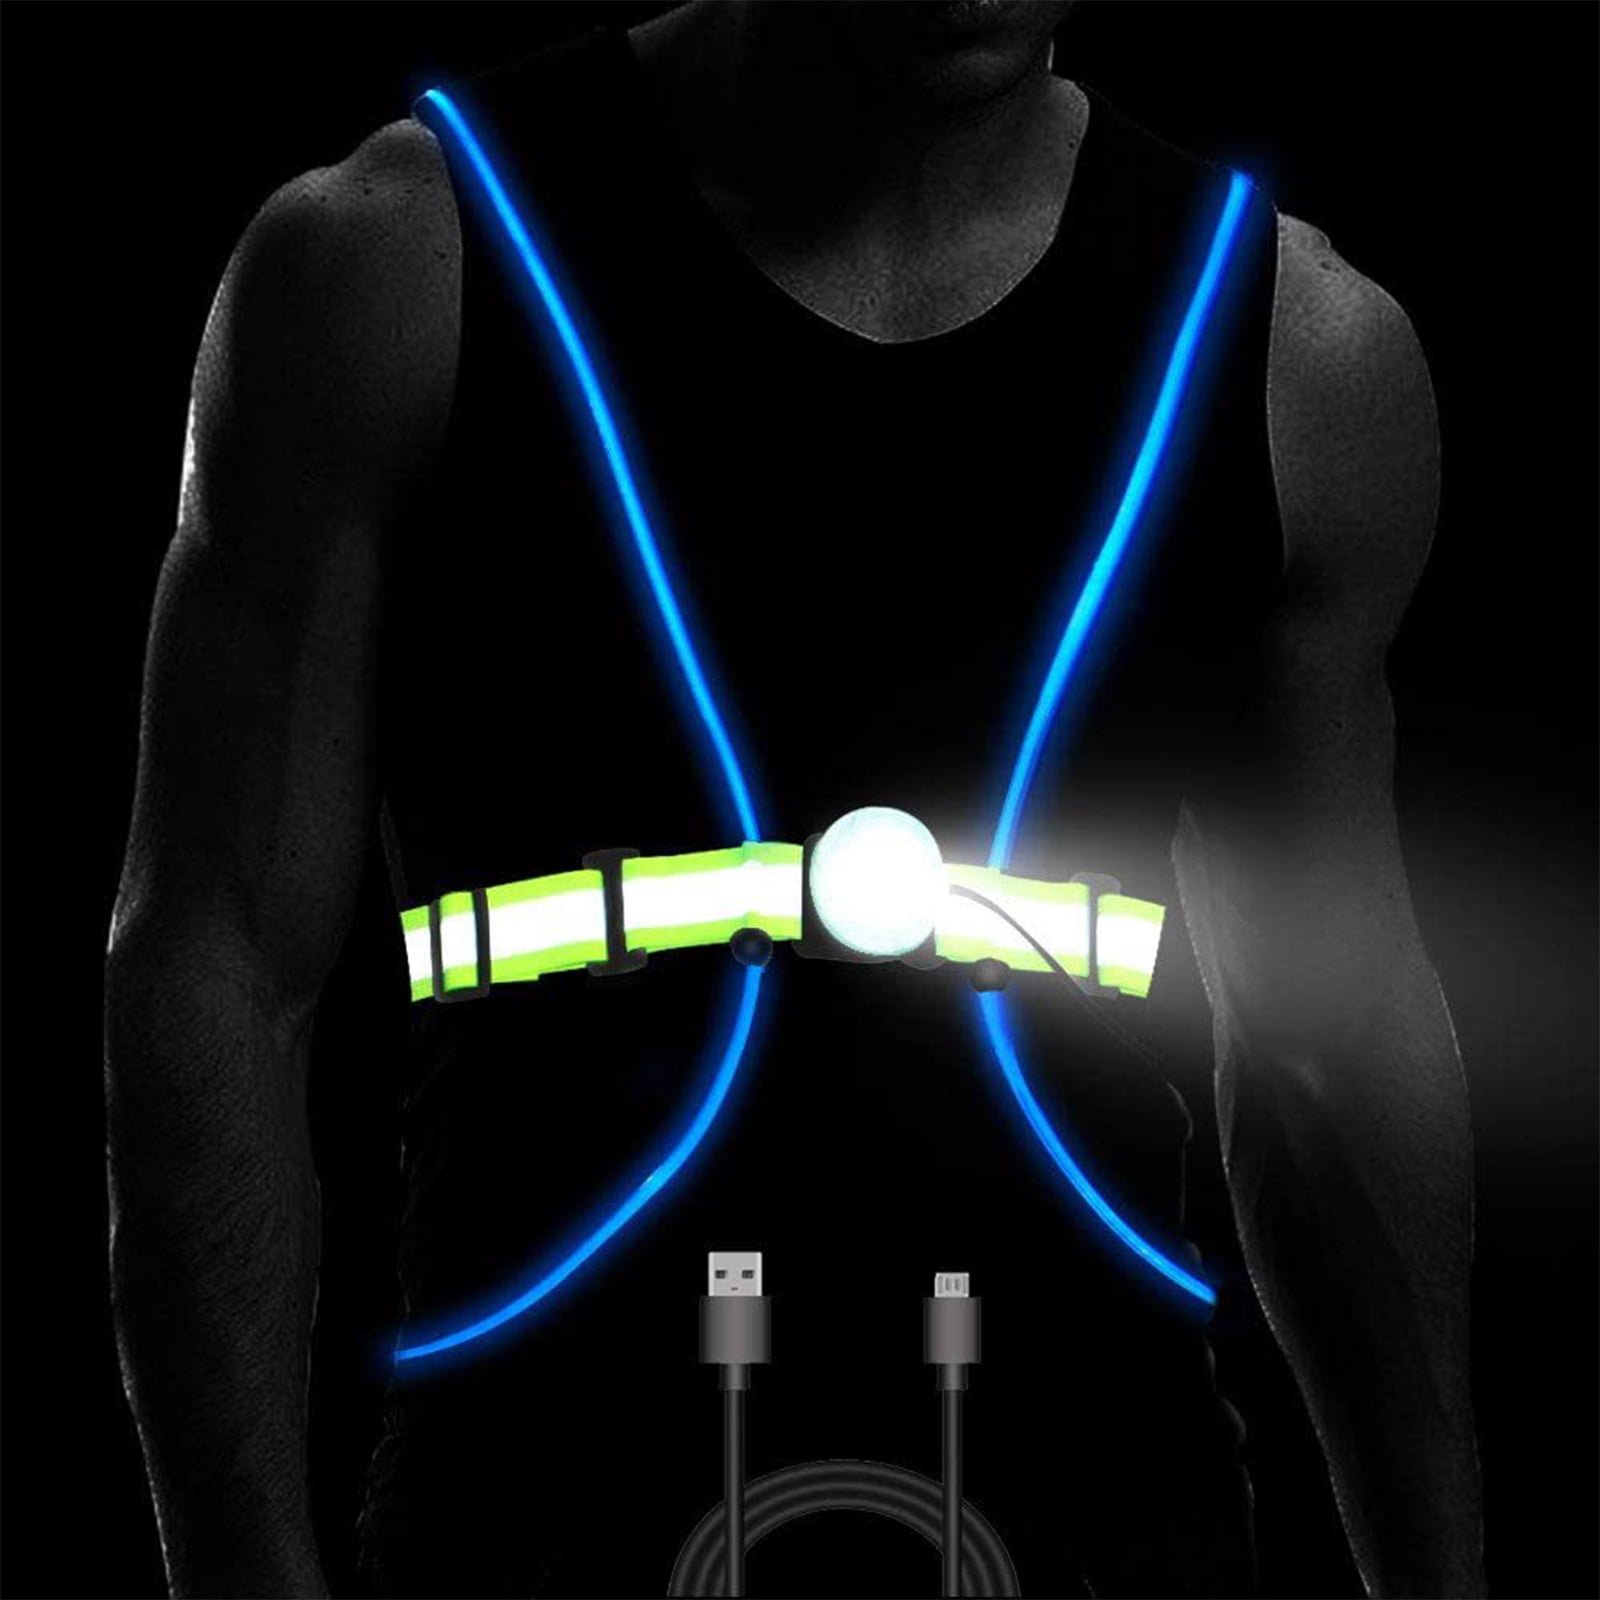 Machine Washable Reflective Running Vest with LED Lights USB Rechargeable Safety Gear with Adjustable Waist Phone Pocket High Visibility Light Up Flashing Vest Gifts for Men Women Kids Runners Walker 